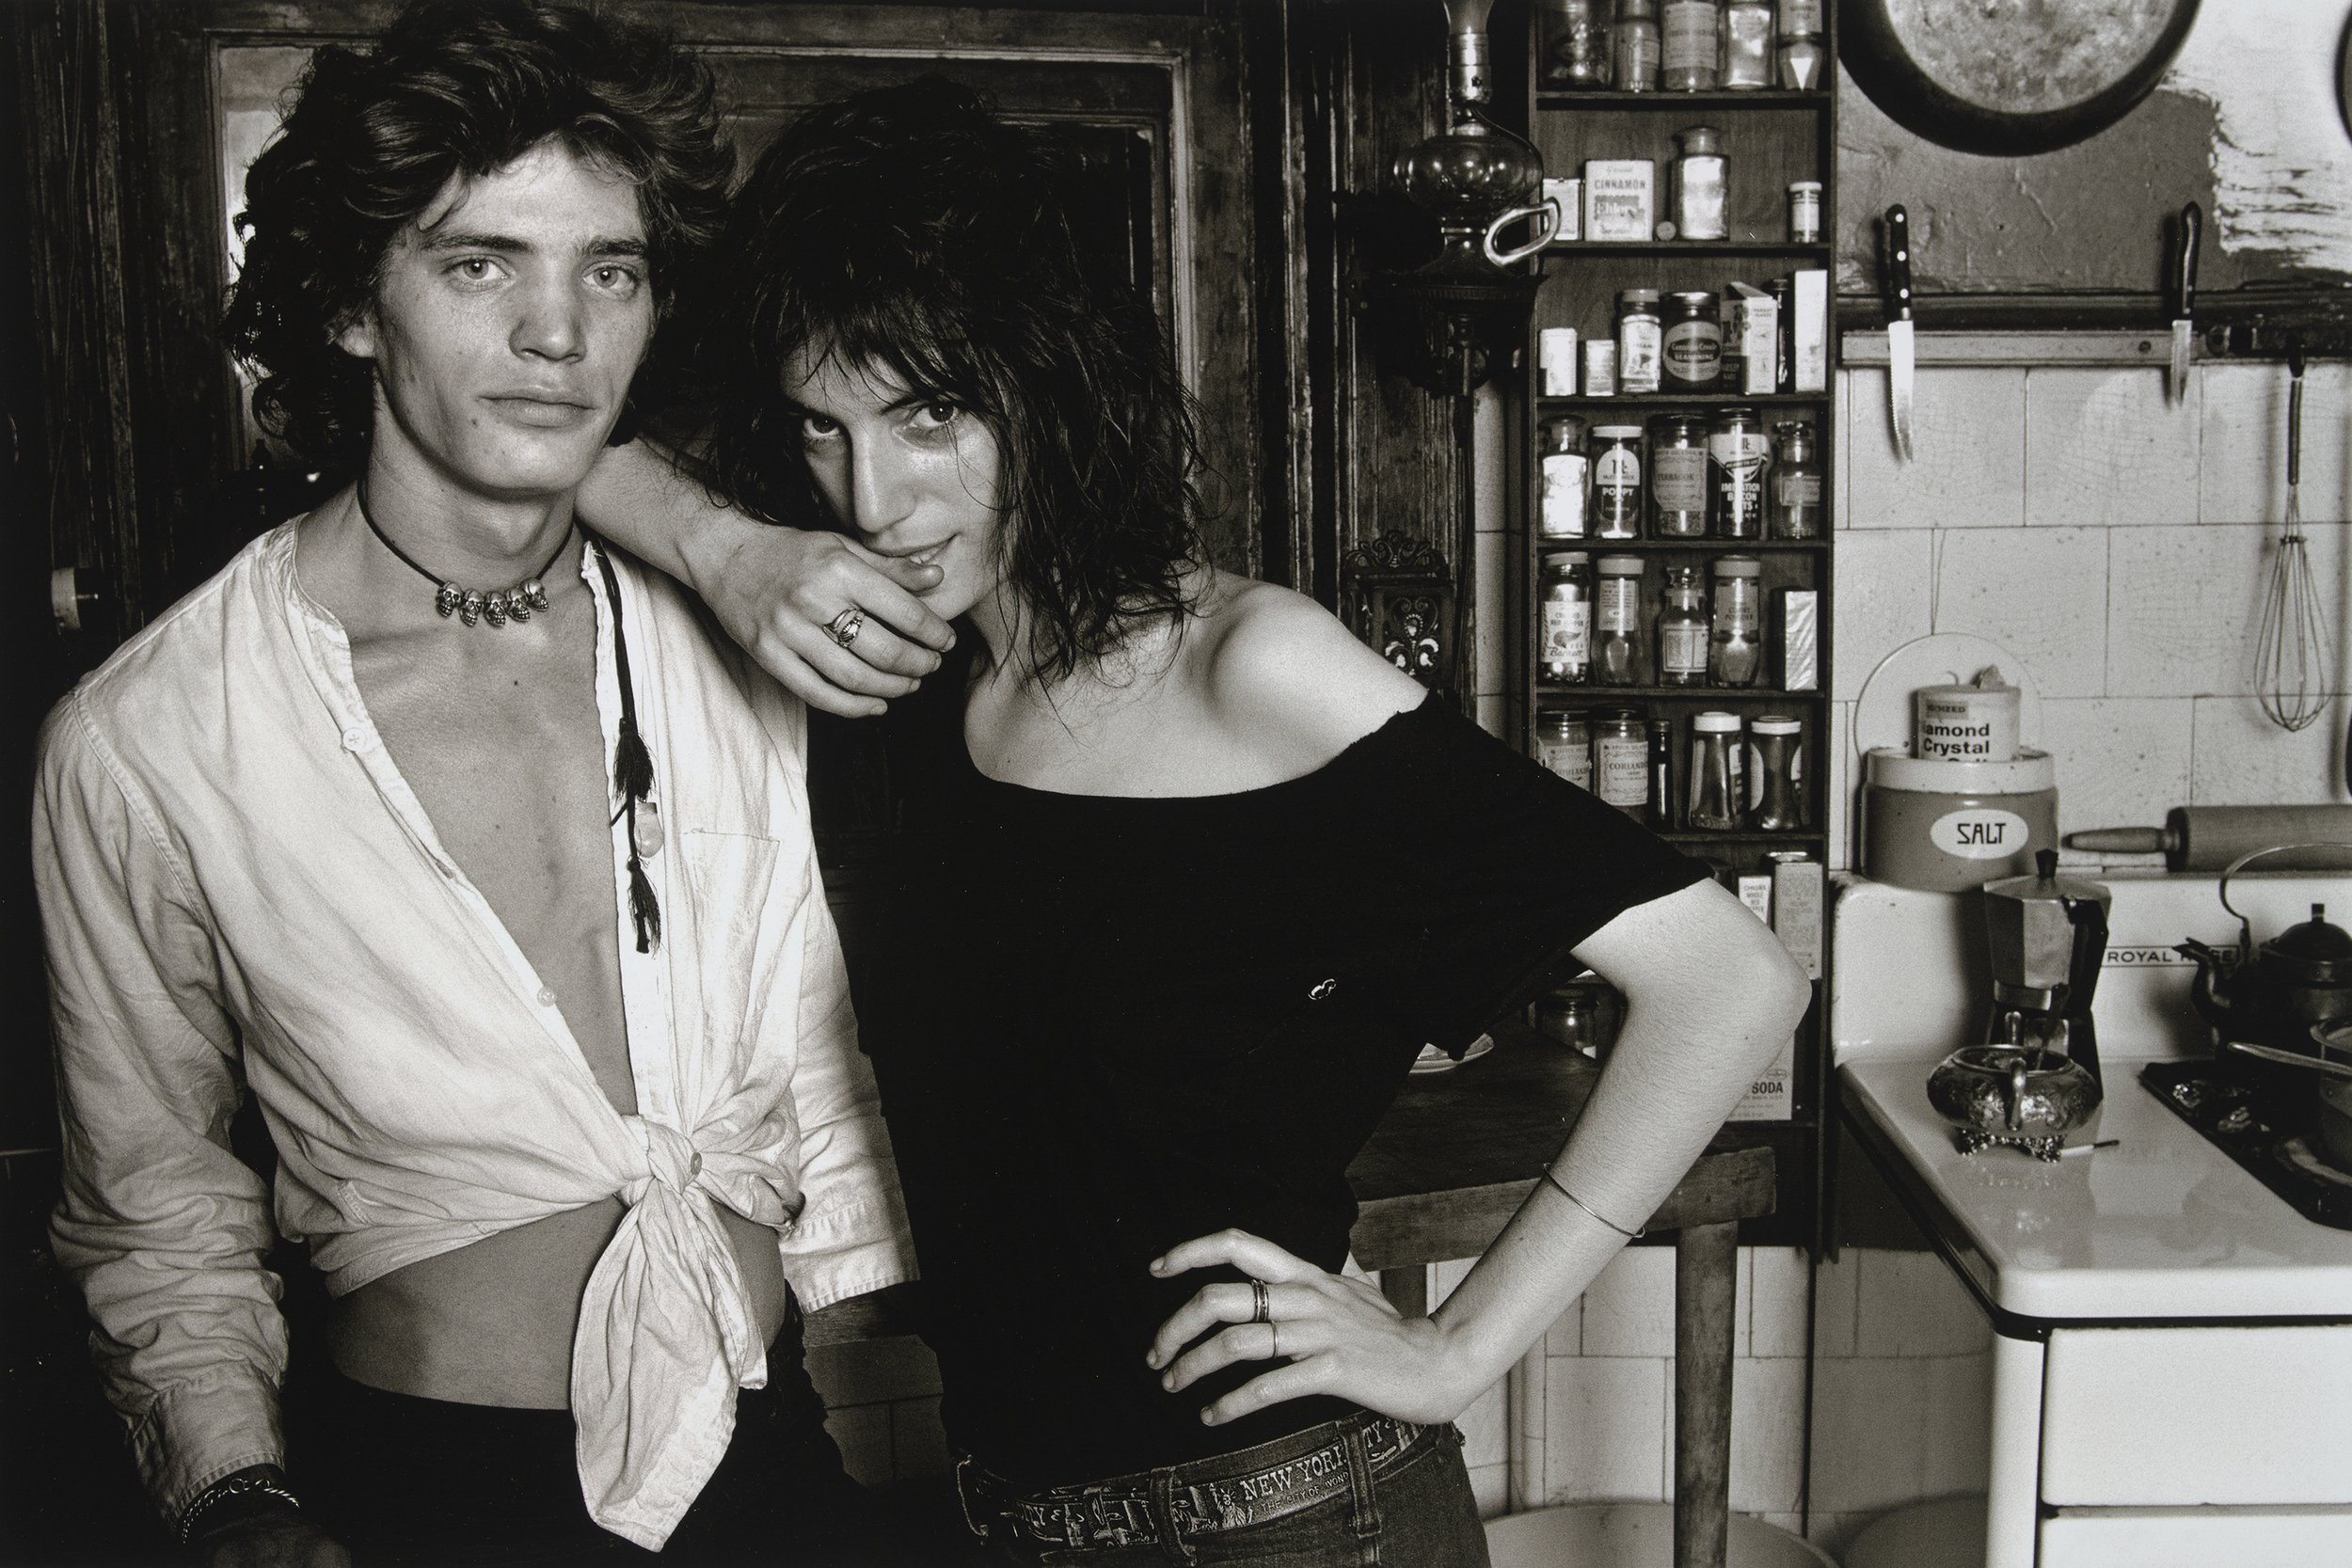  Norman Seeff (United States, born South Africa, born 1939),  Robert Mapplethorpe and Patti Smith, New York , 1969, archival pigment print, 15 x 22 inches. Promised Gift from the Judy Glickman Lauder Collection, 1.2016.1. Image courtesy Luc Demers. ©